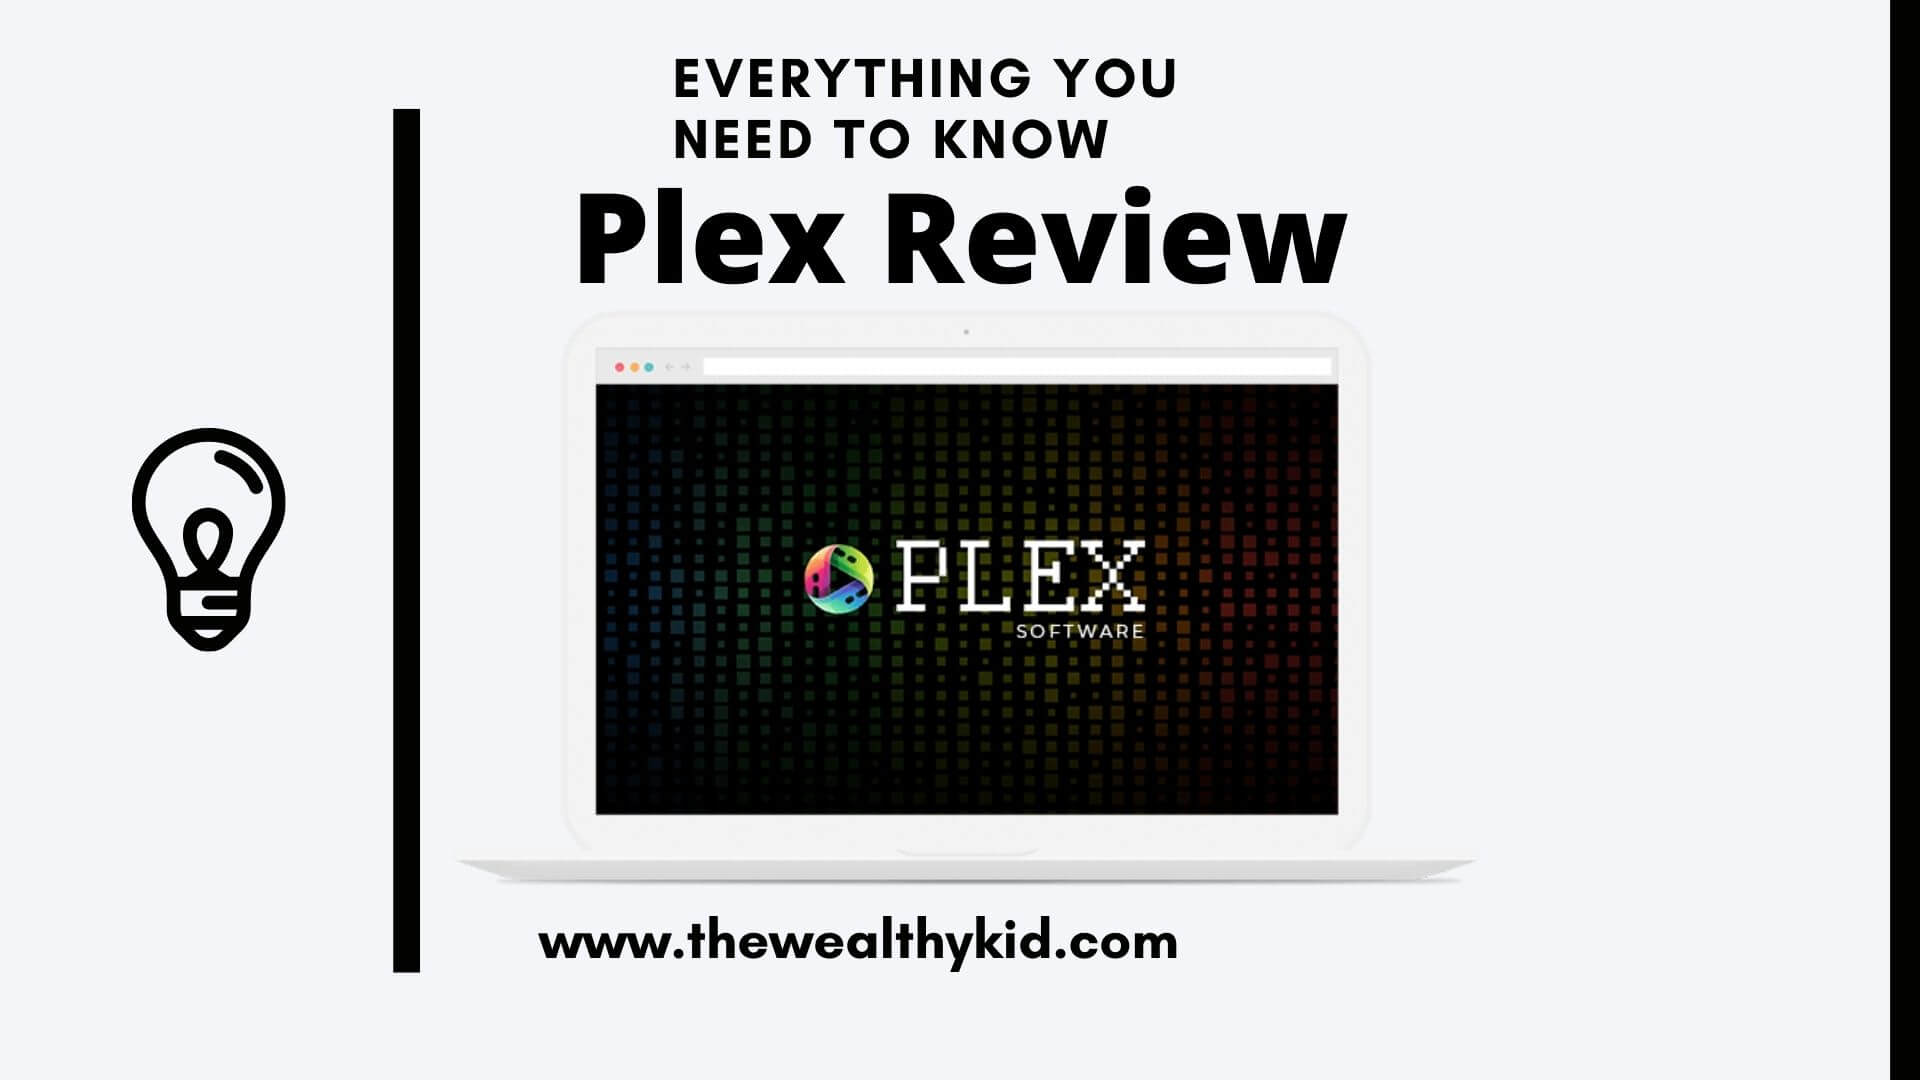 Plex Software Review – Everything You Need To Know In One Place